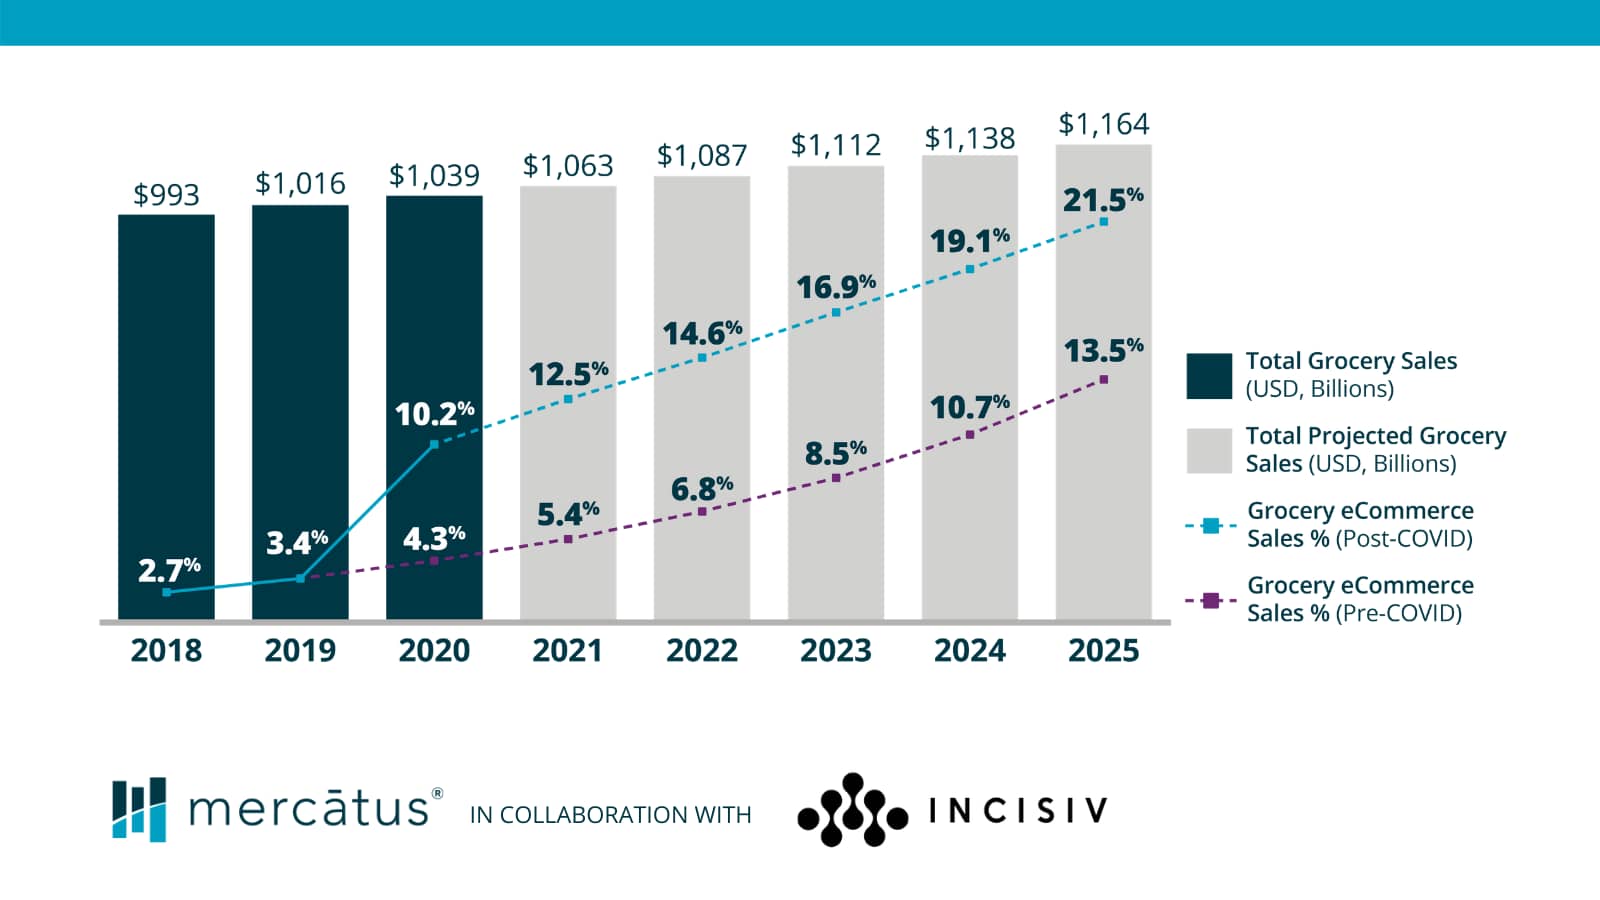 Online Grocery Sales Projected to Reach $250B by 2025, According to New Research From Mercatus and Incisiv